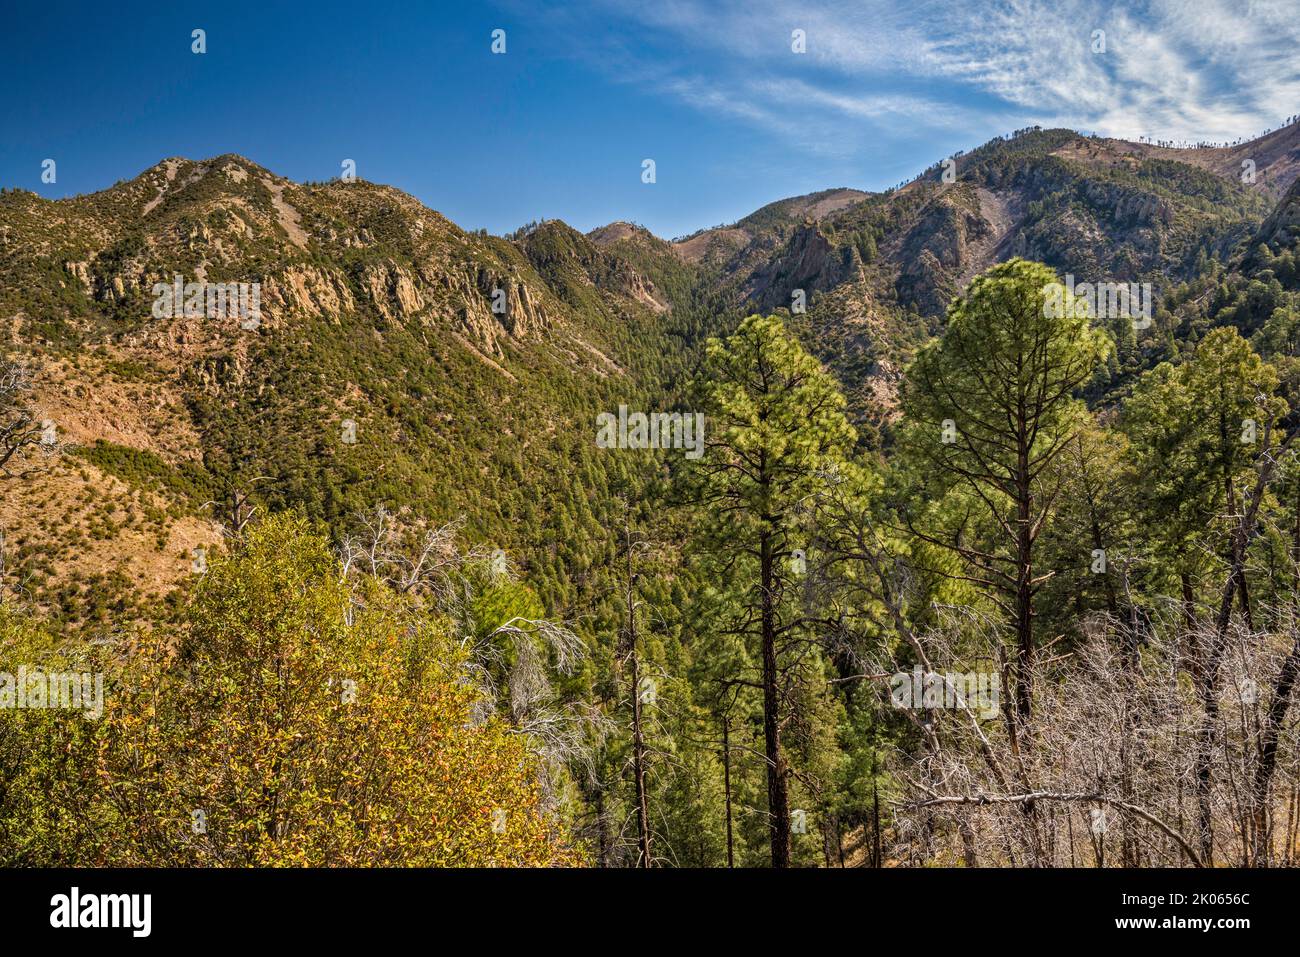 Unnamed peaks over North Ward Canyon, Little Baldy Mtn in dist, view from Mormon Ridge Trail, Chiricahua Mountains, Coronado Natl Forest, Arizona, USA Stock Photo